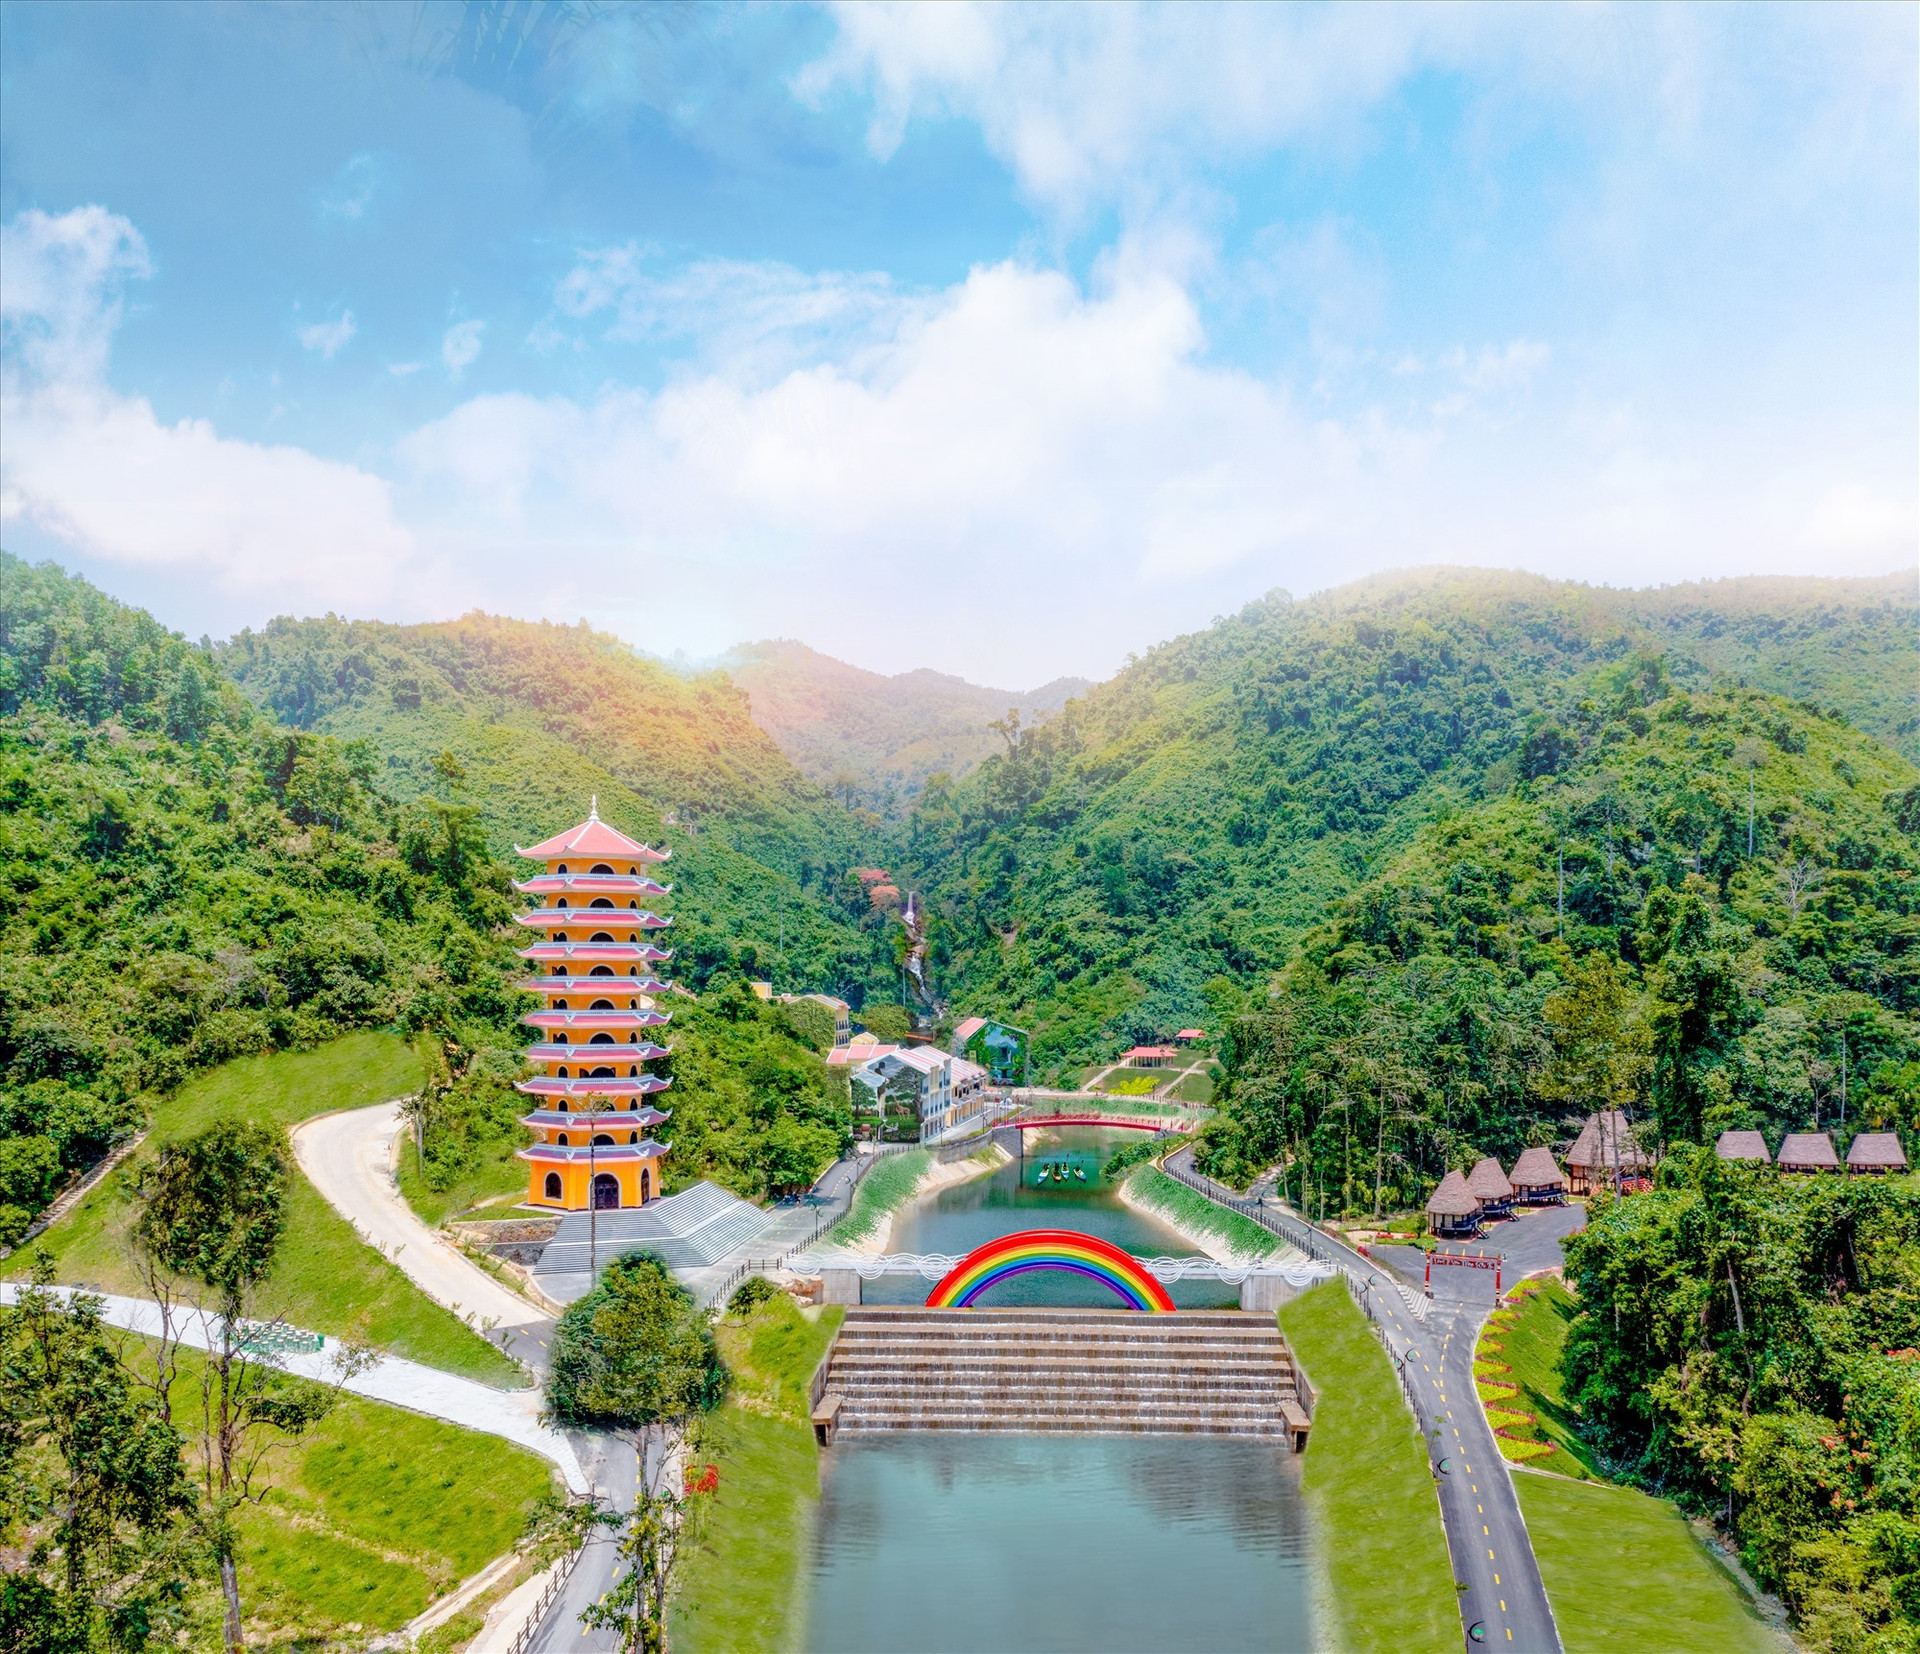 Part of the ecotourism site Dong Giang Heaven Gate